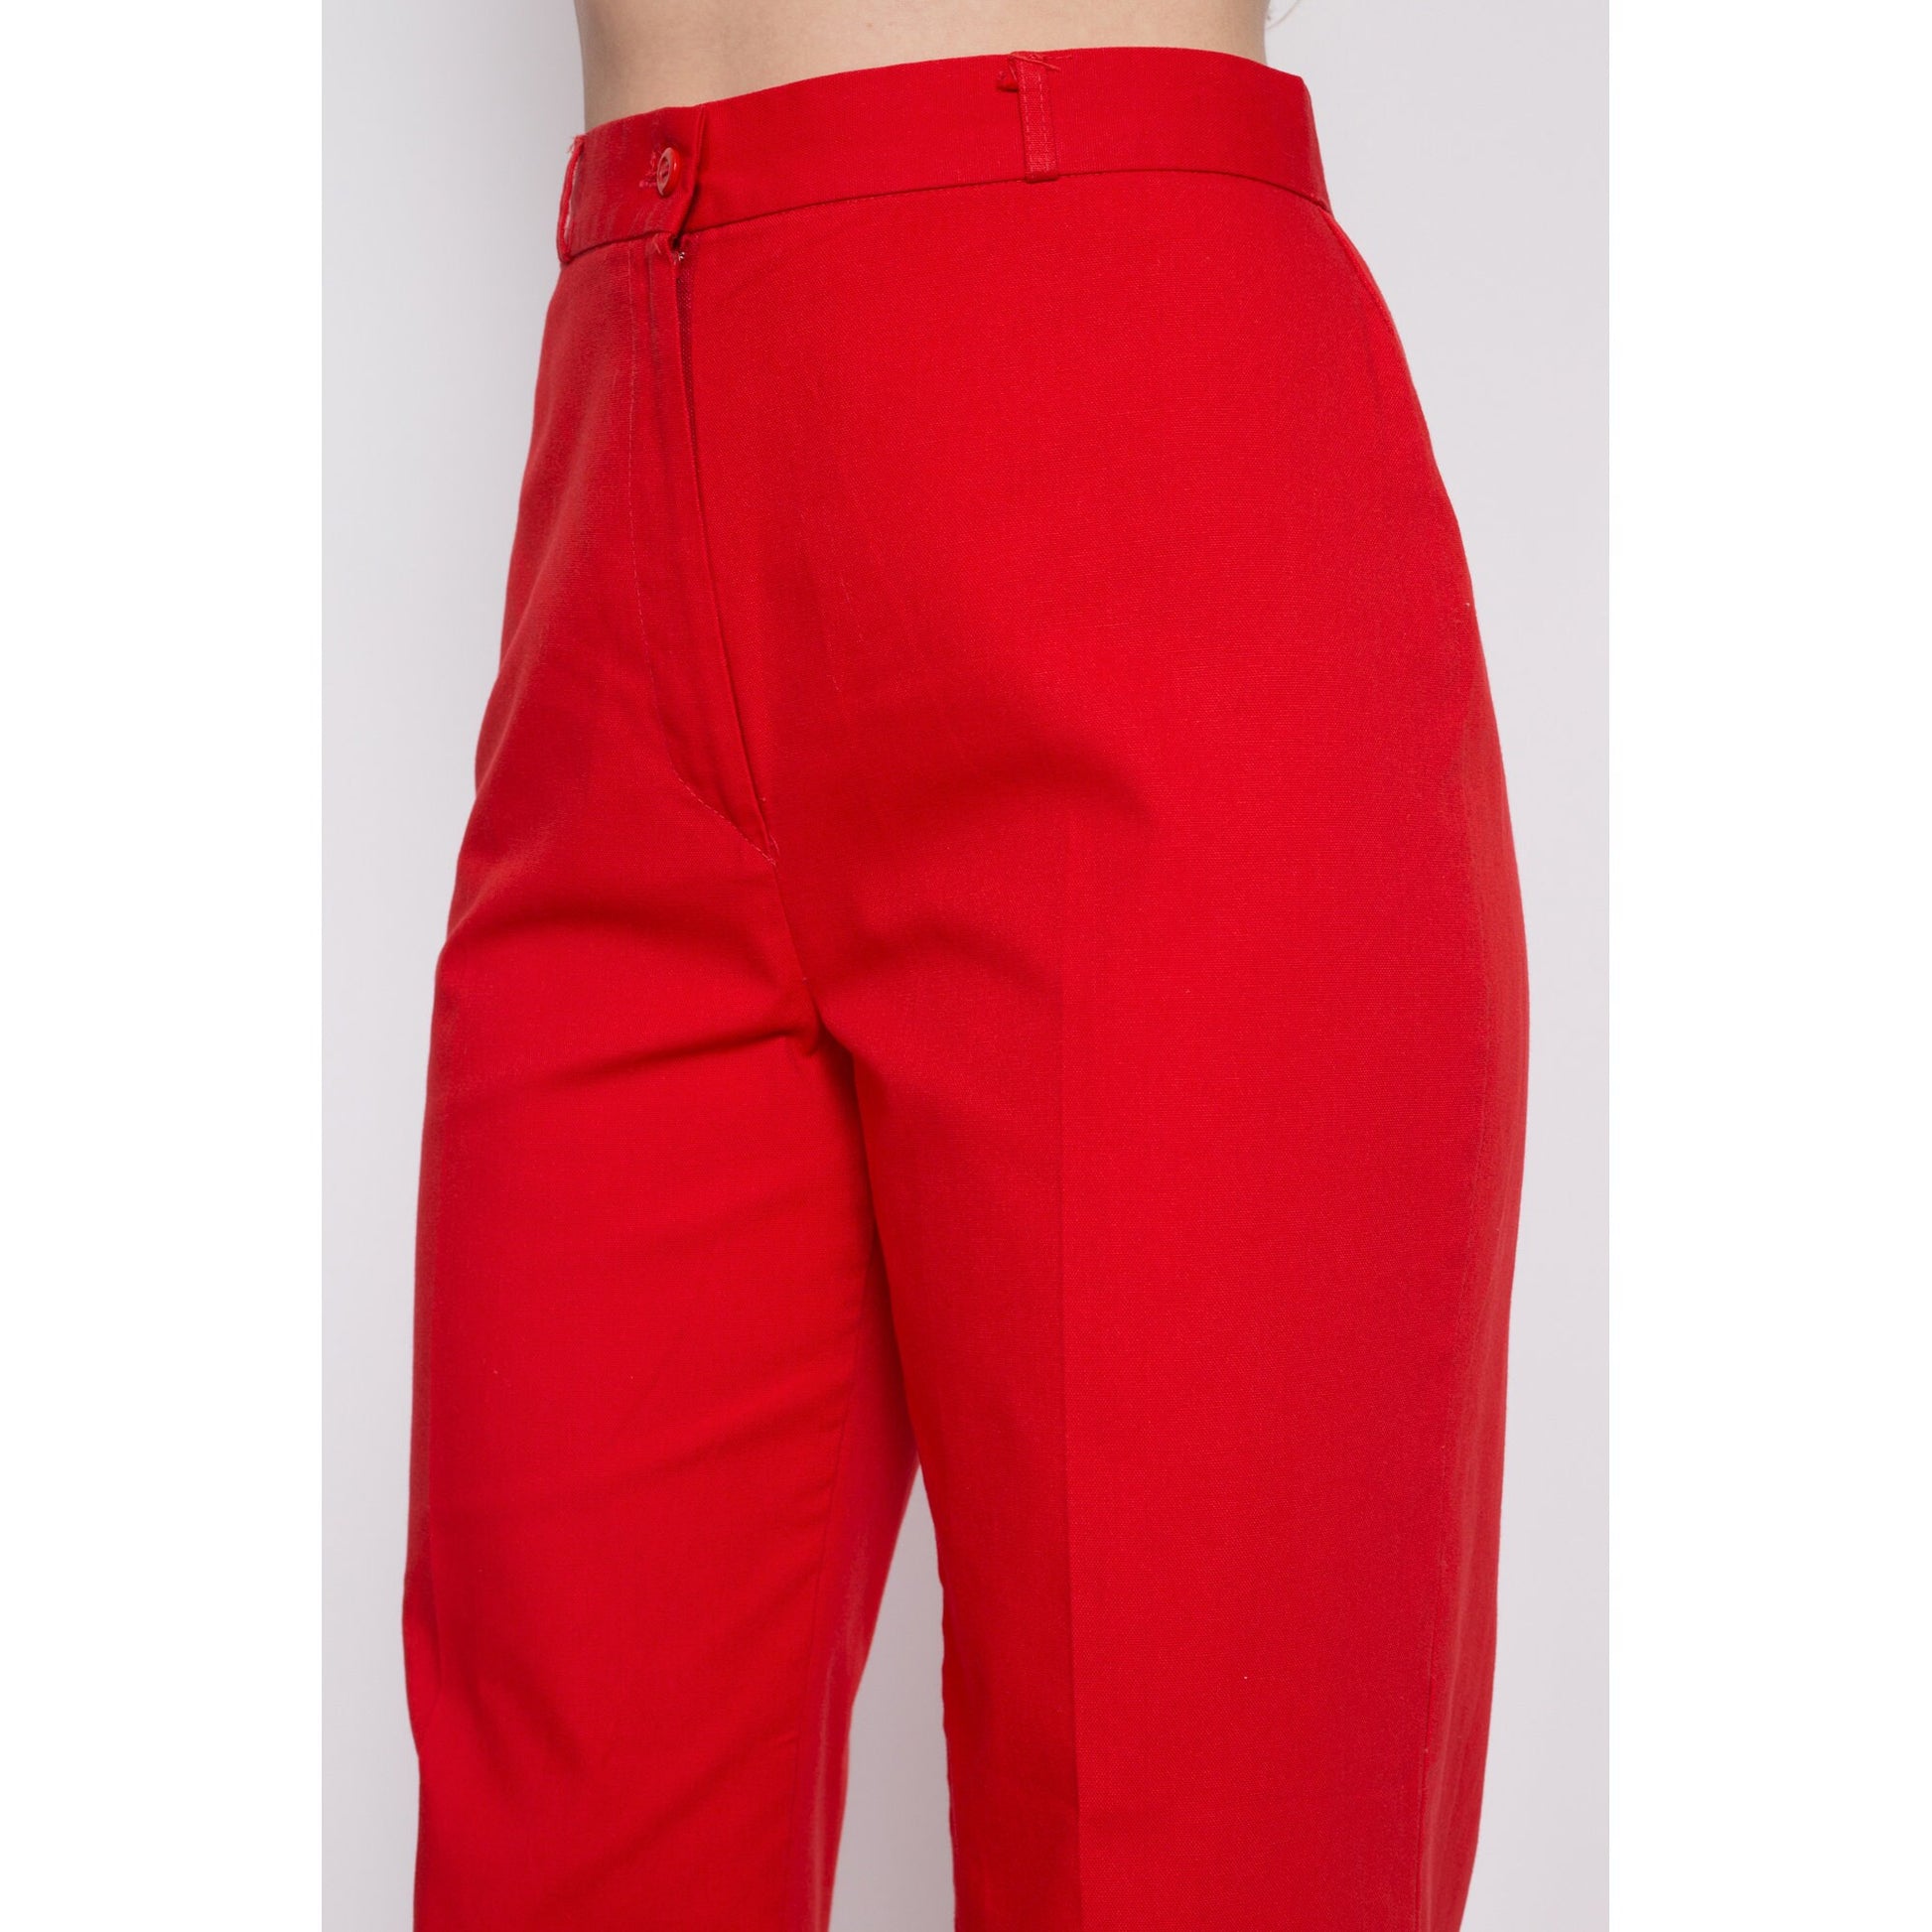 70s Red High Waisted Pants - Medium, 28.5 – Flying Apple Vintage